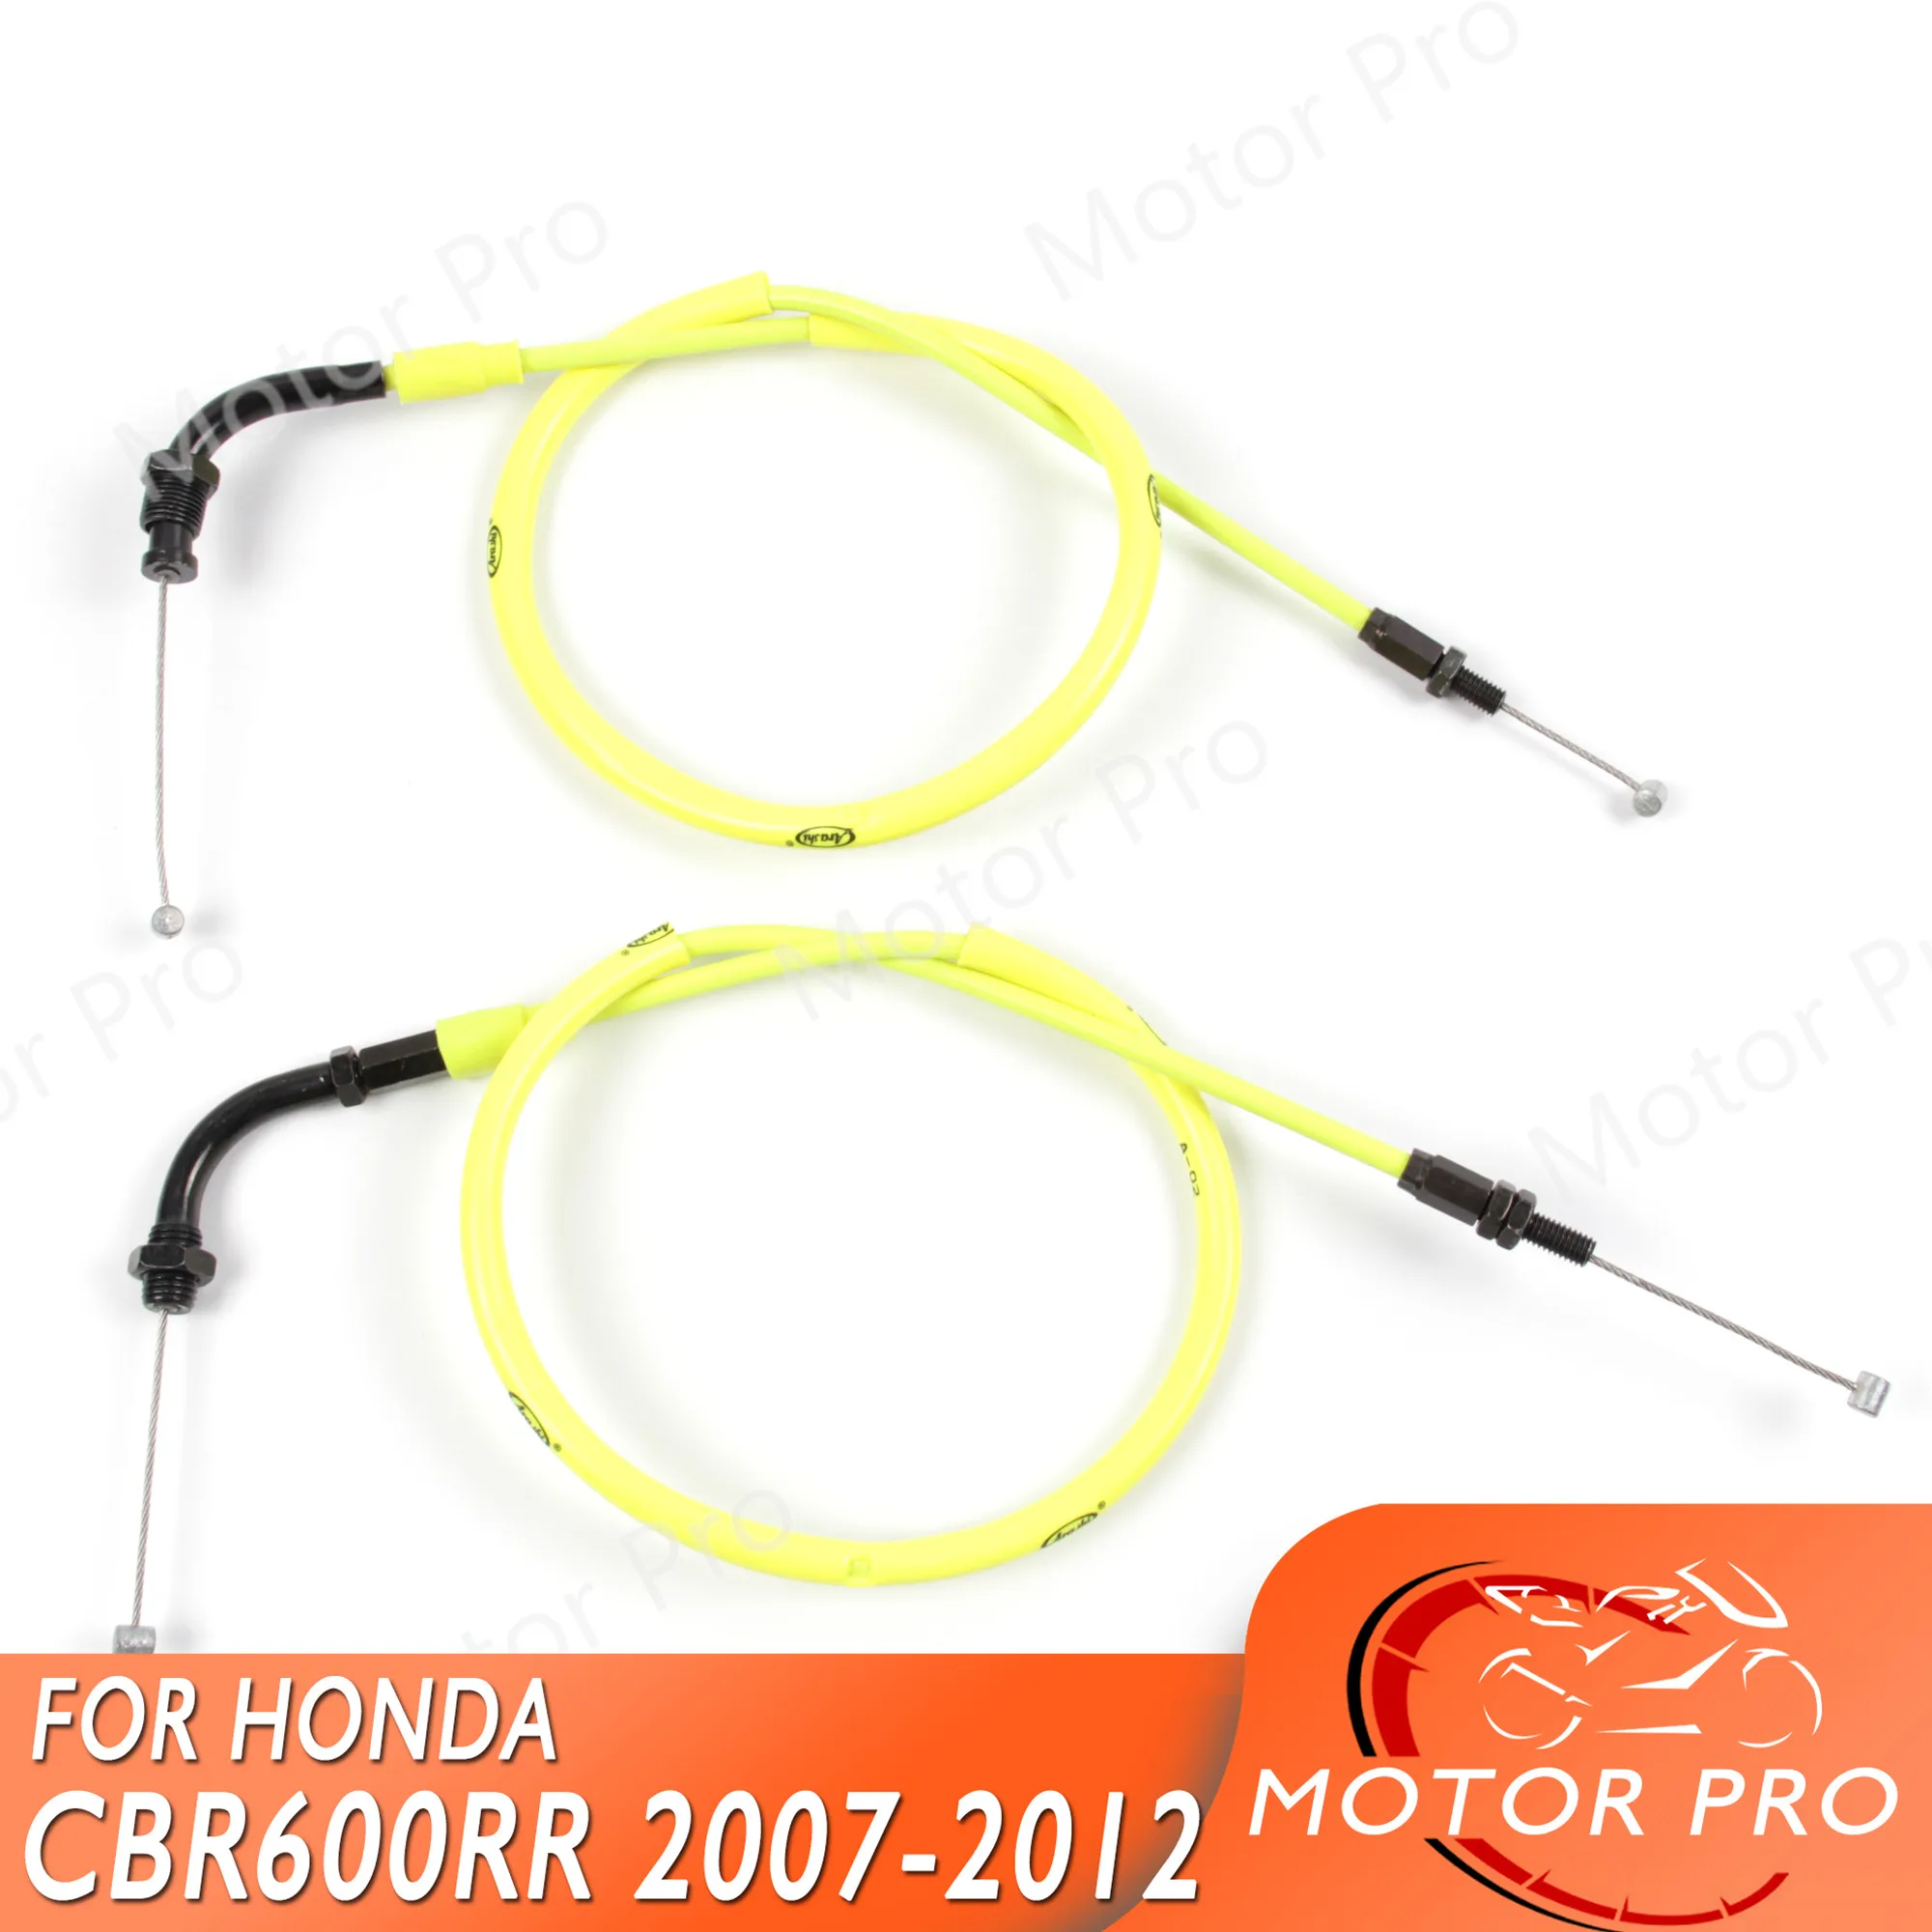 

Throttle Cable For Honda CBR600RR 2007 - 2012 Stainless Wire Line Rubber Motorcycle CBR 600 RR CBR600 600RR 2008 2009 2010 2011